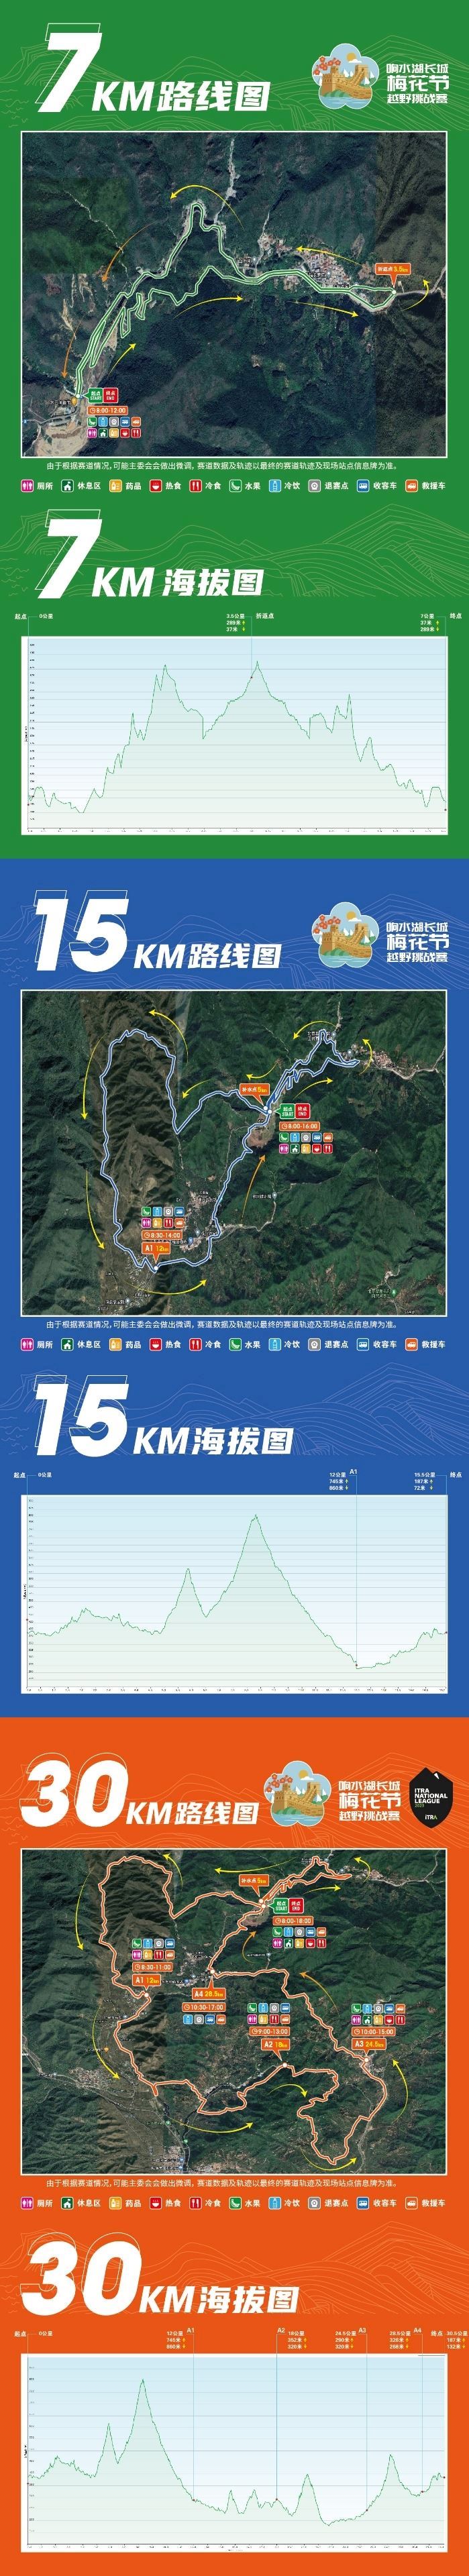 Xiangshui Lake Great Wall Ultra Trail Challenge Route Map